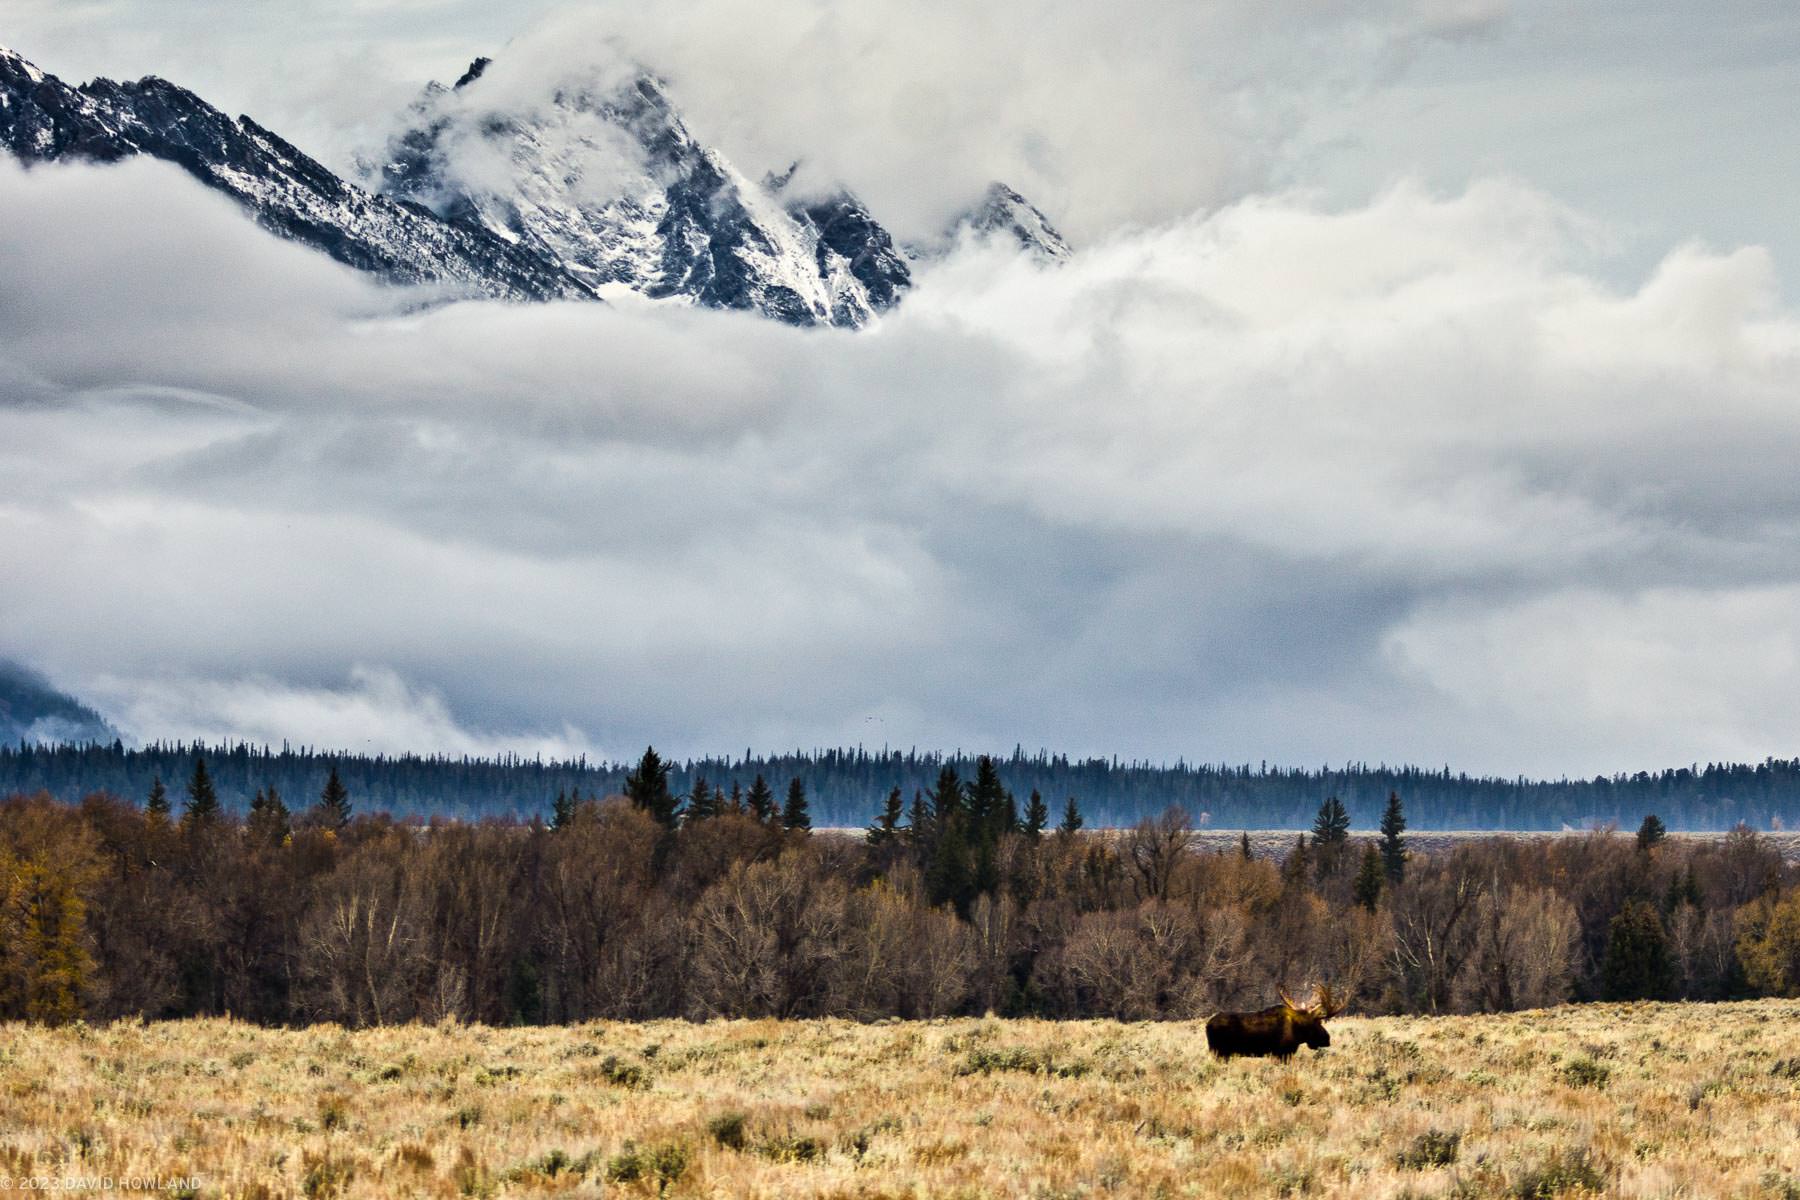 A photo of a bull moose standing in a field in front of the snow covered peaks of the Teton Range in Grand Teton National Park